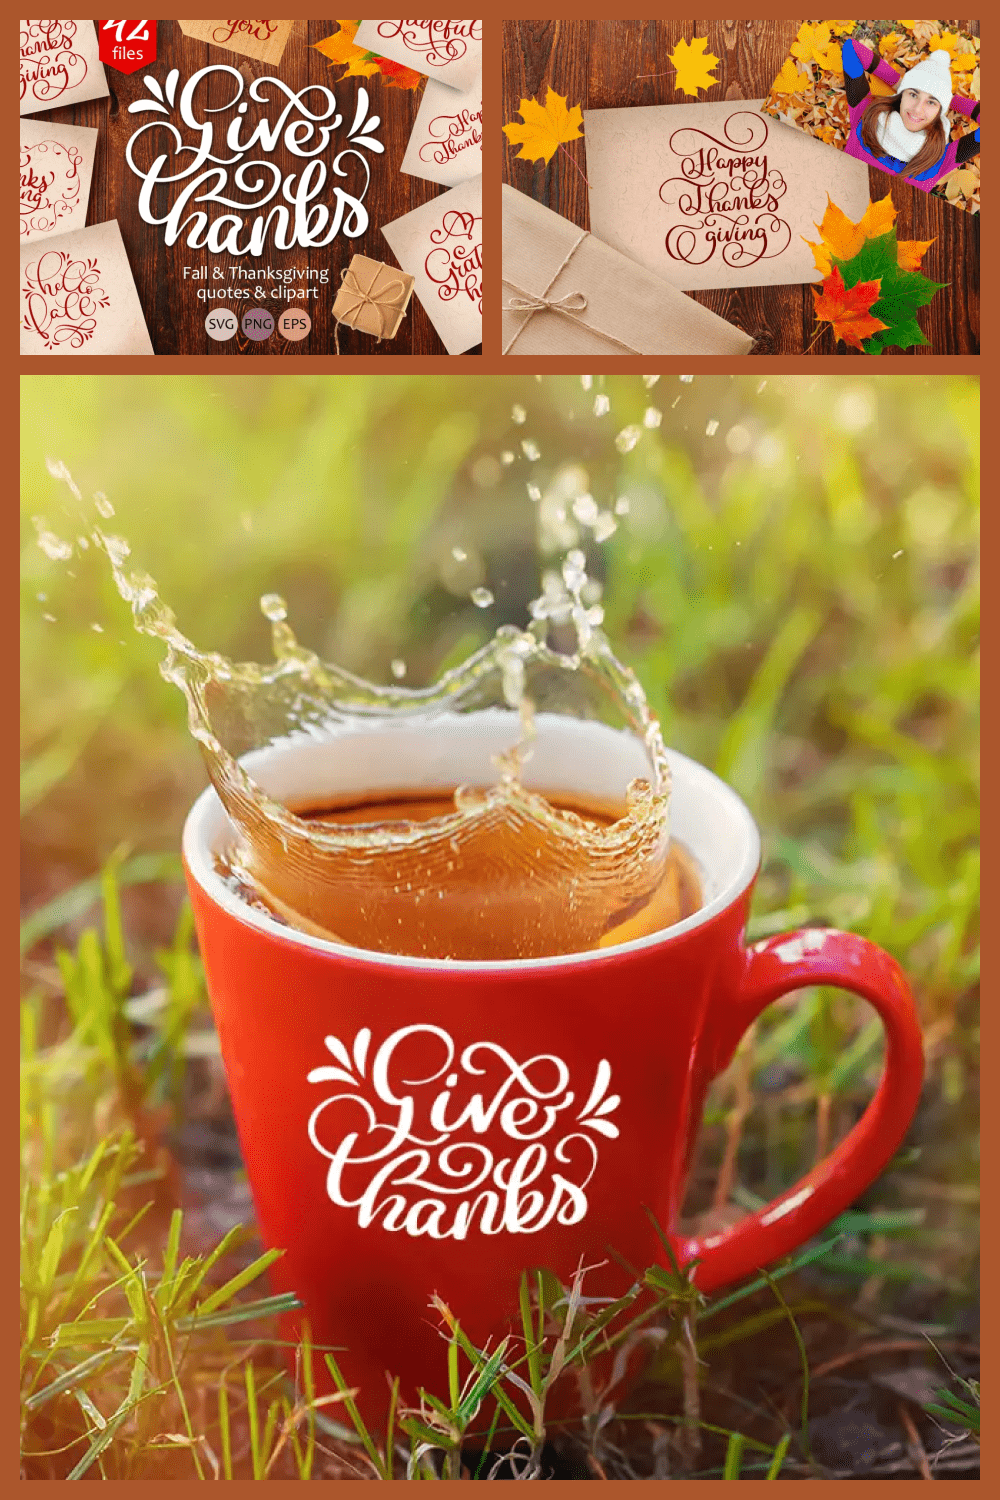 Collage with a photo of a red cup with tea with a white logo, envelopes and colorful leaves.